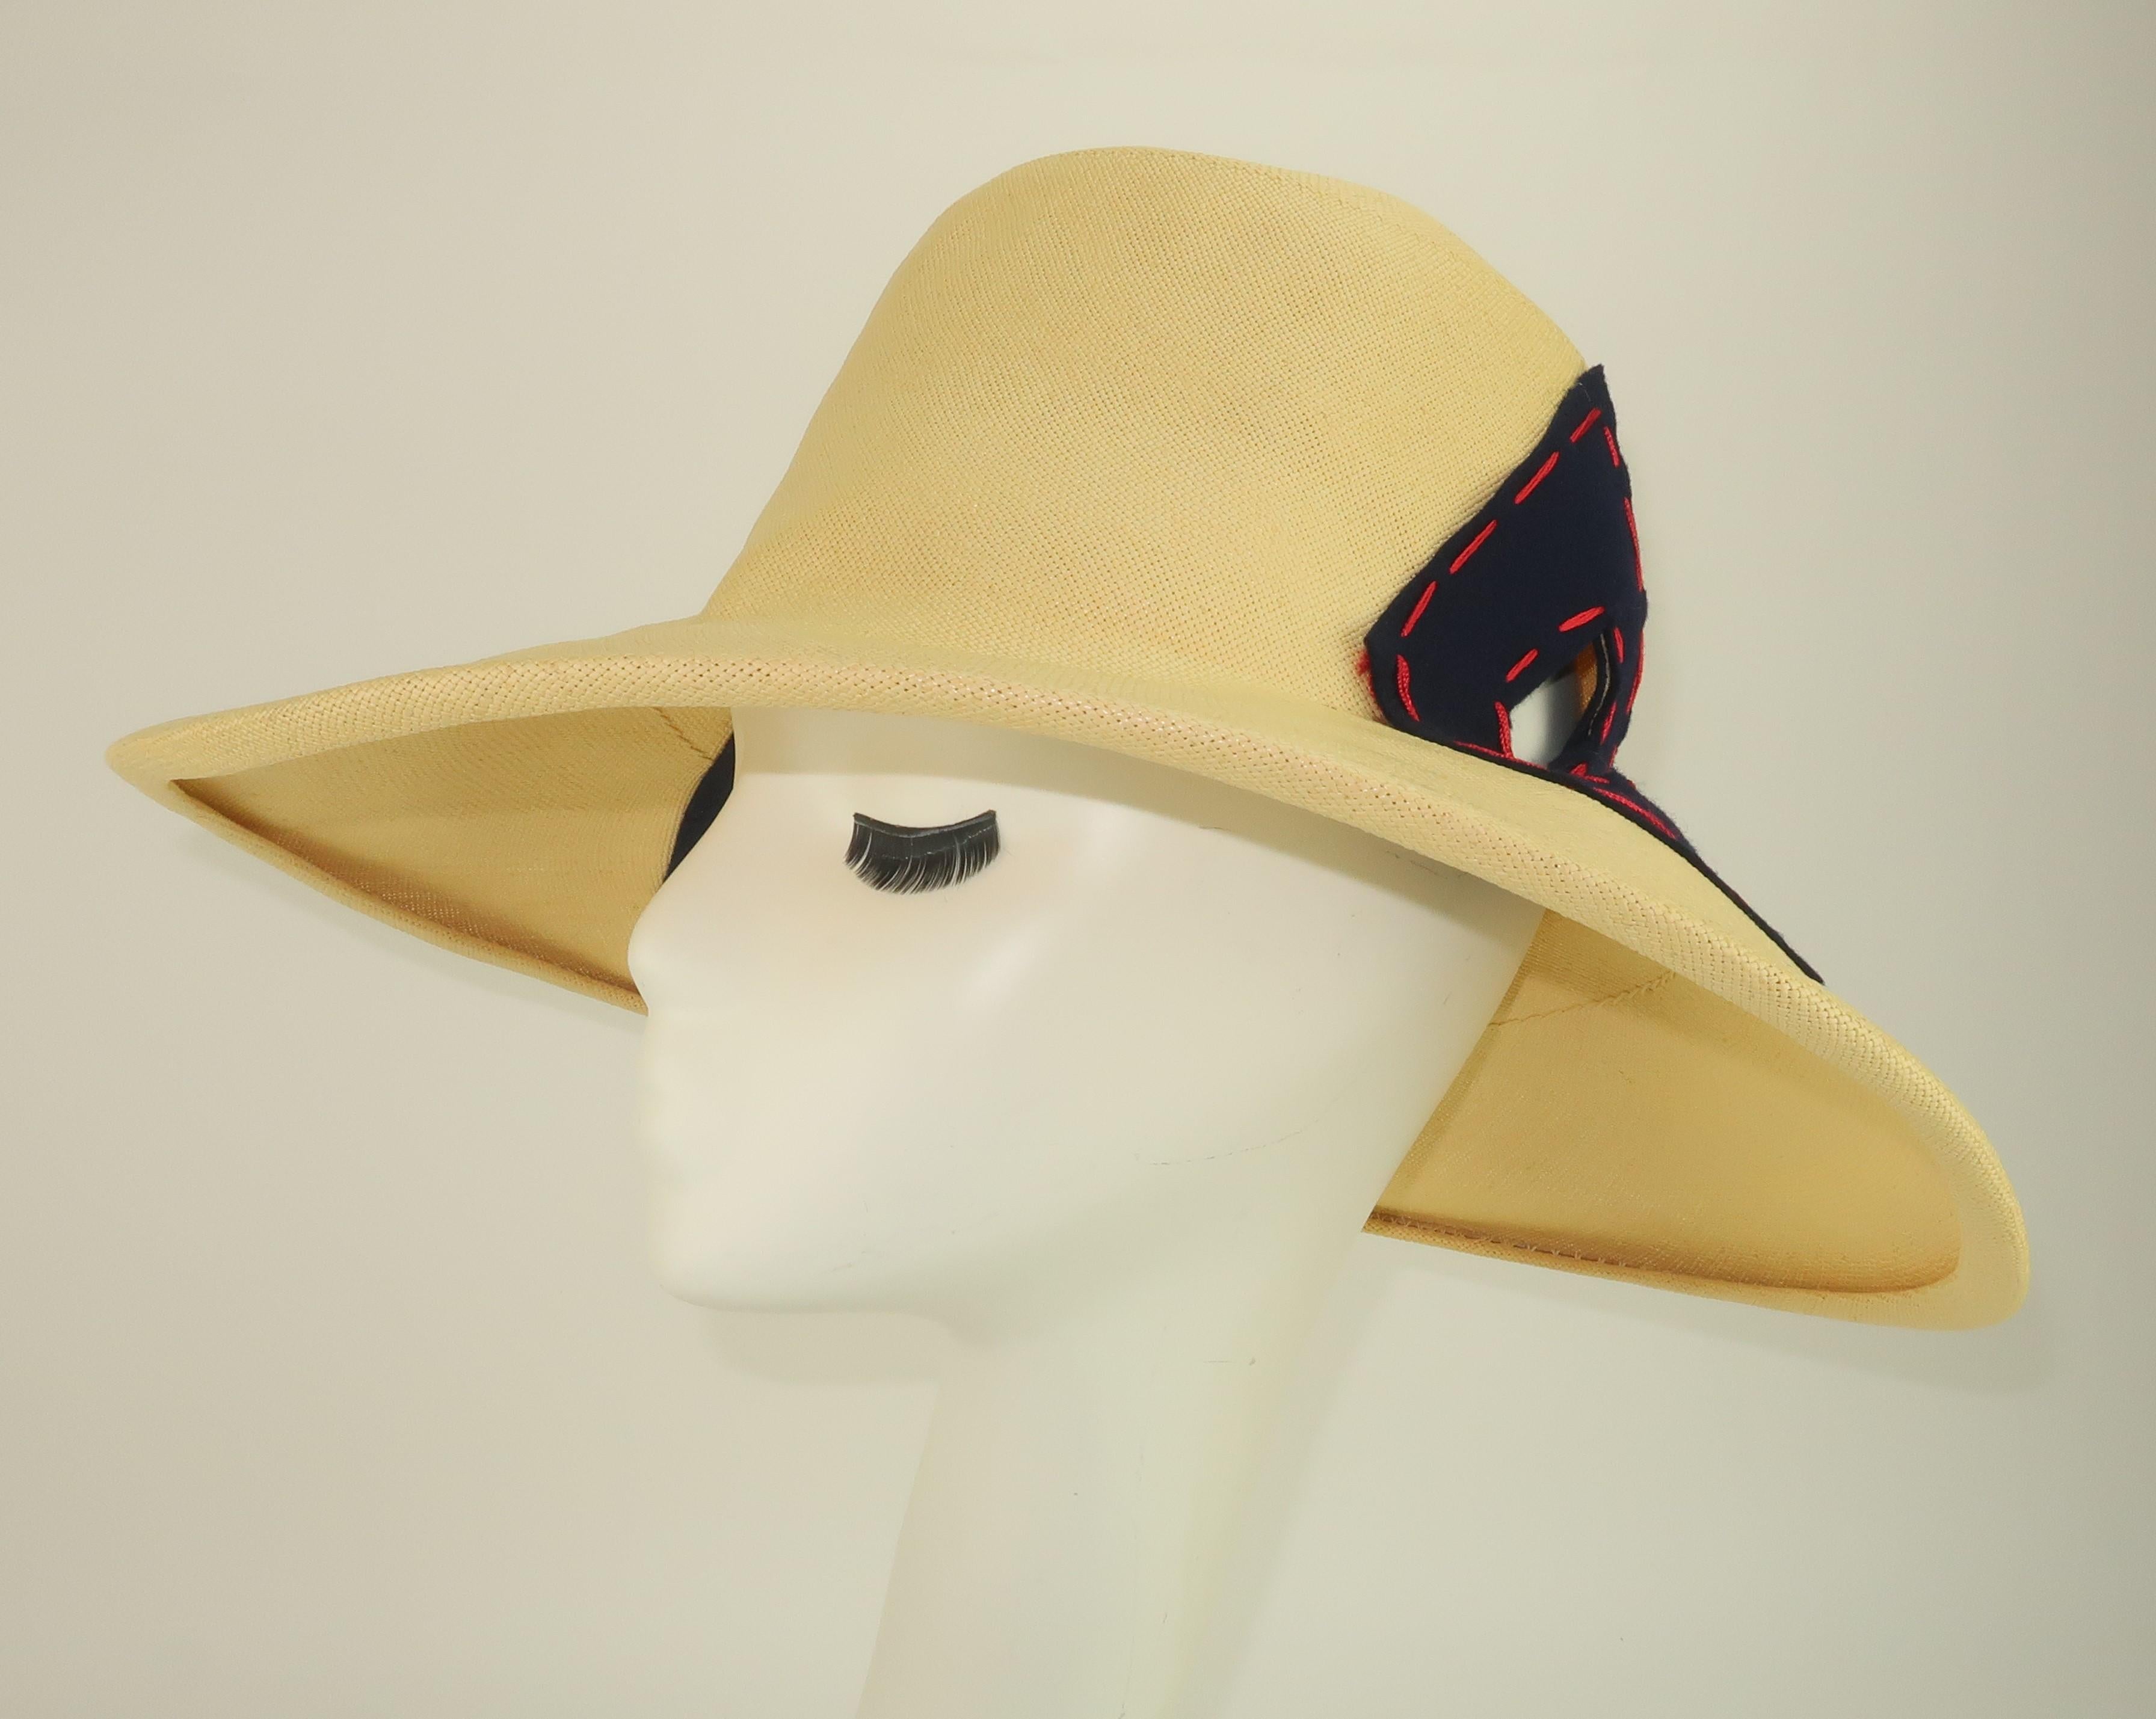 Women's Yves Saint Laurent Straw Hat With Blue & Red Cut Outs, 1970's